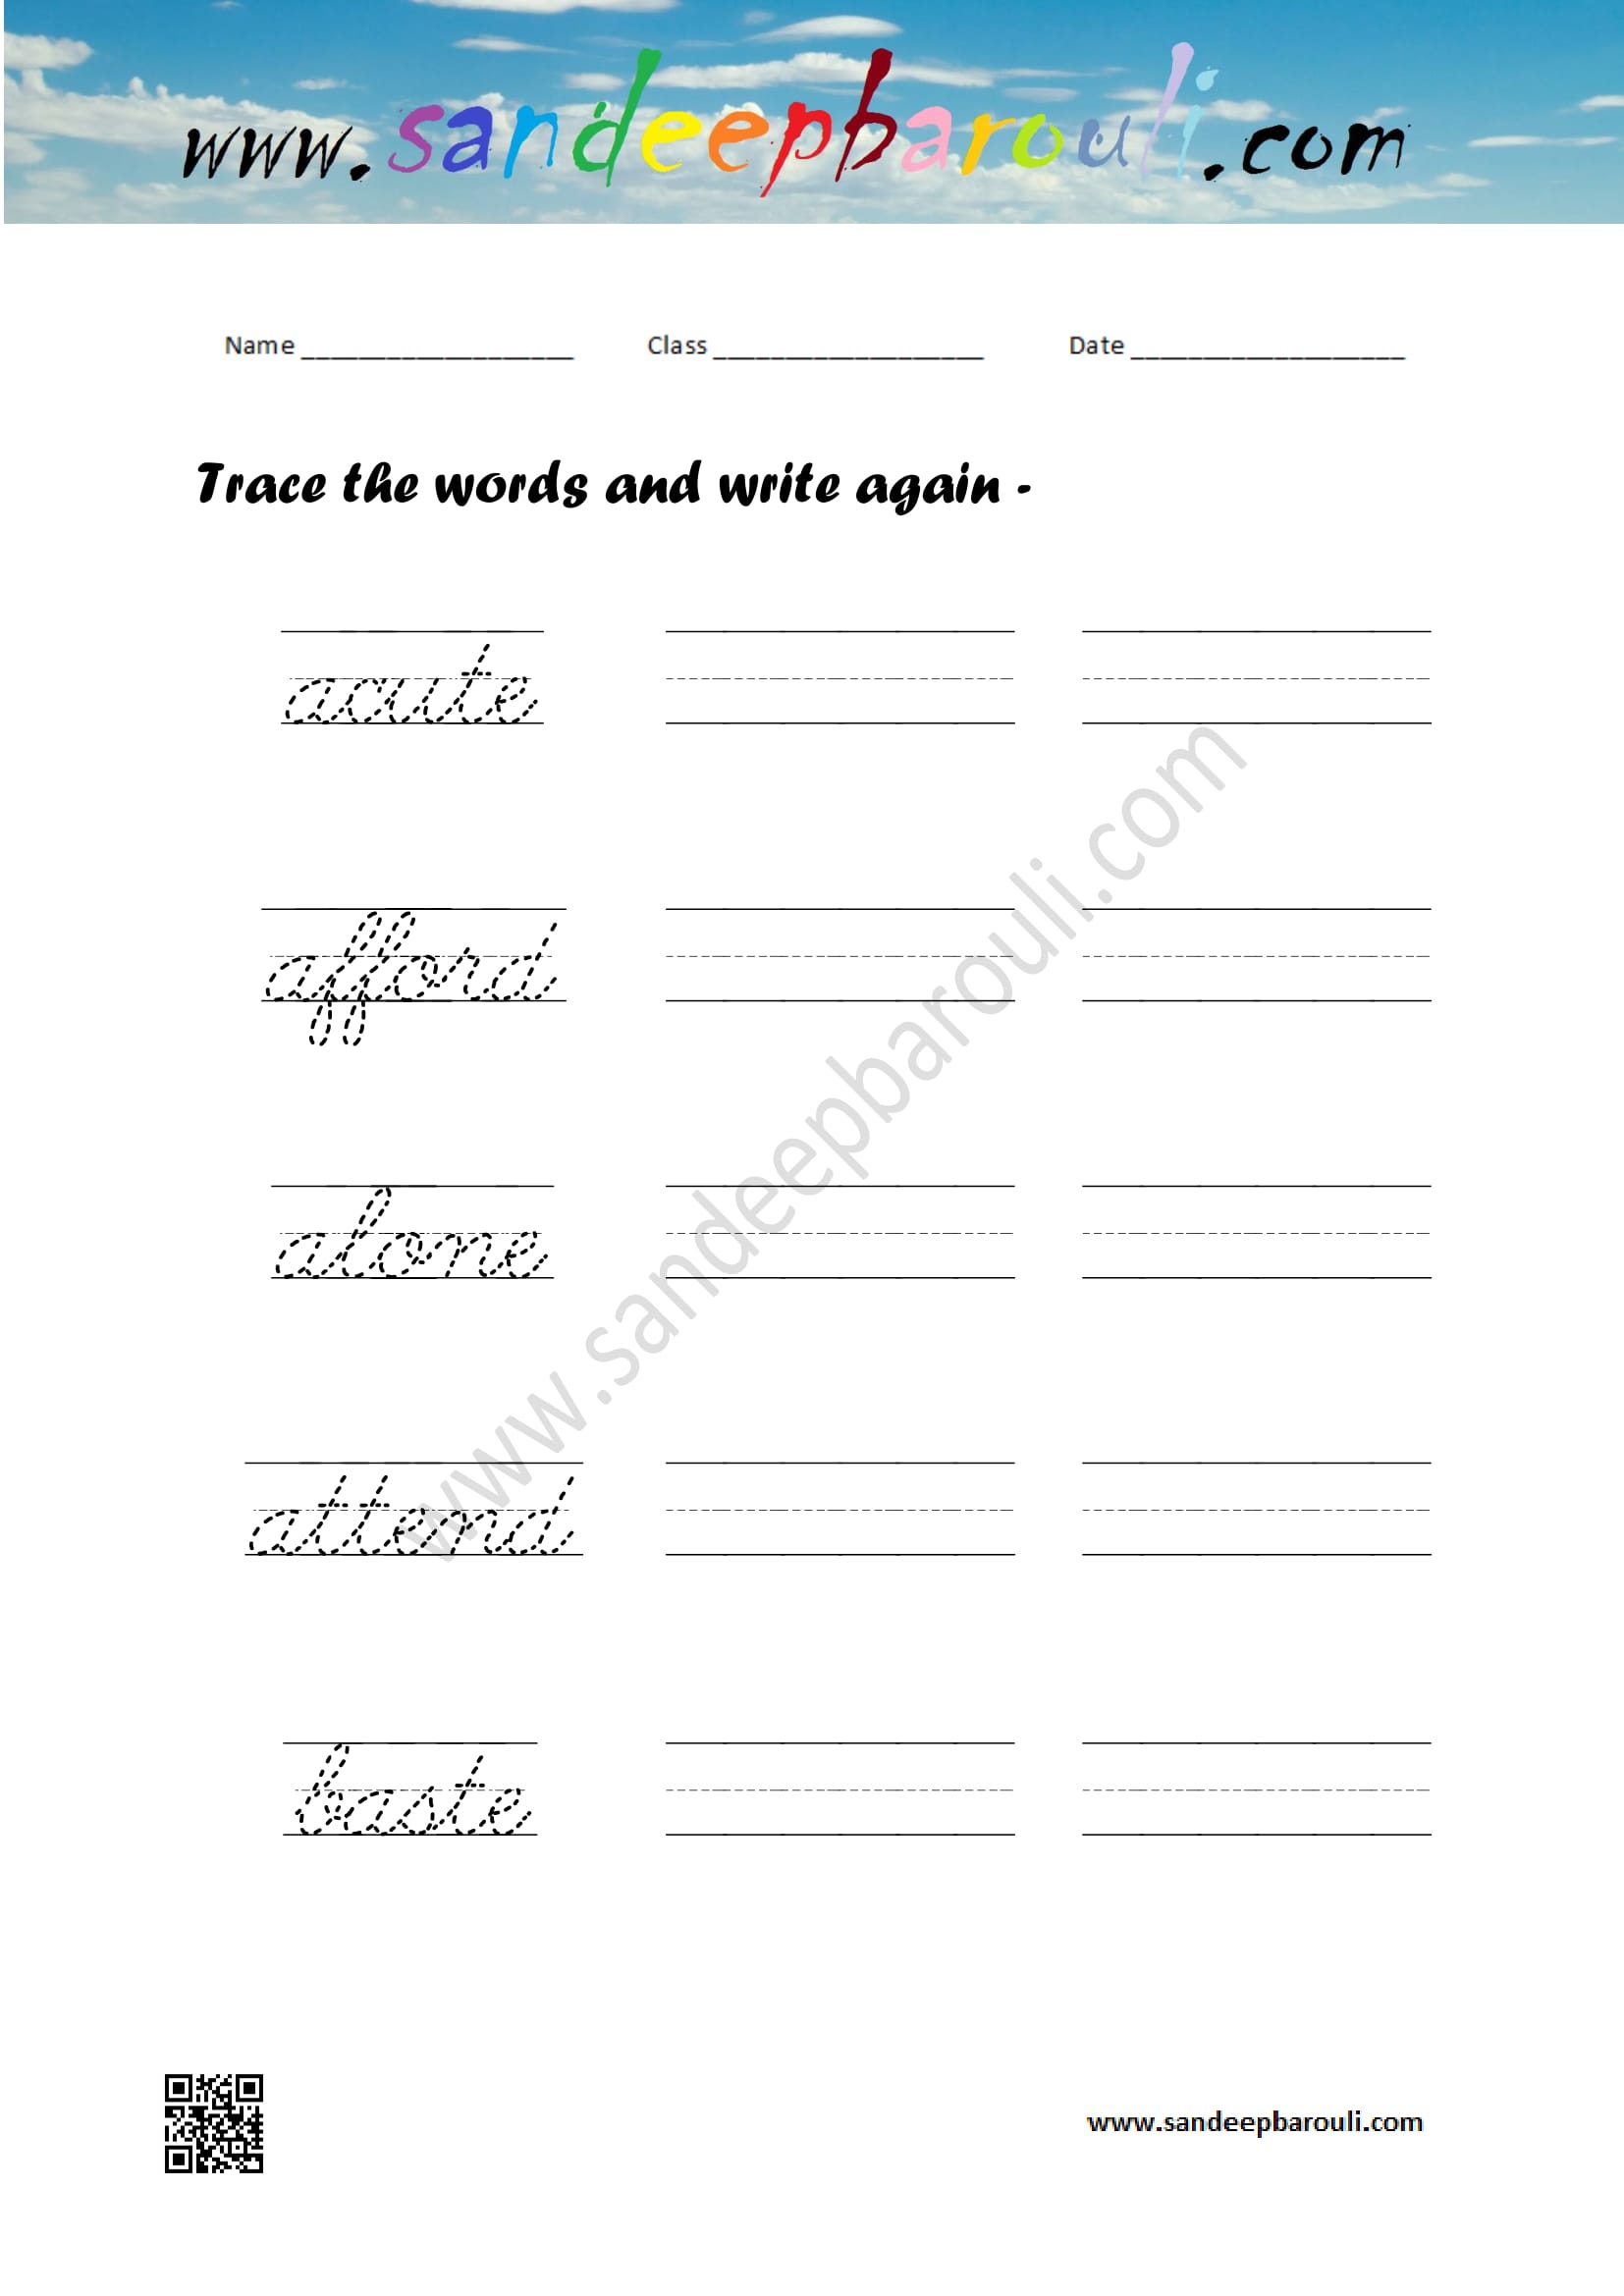 Cursive writing worksheet – trace the words and write again (87)